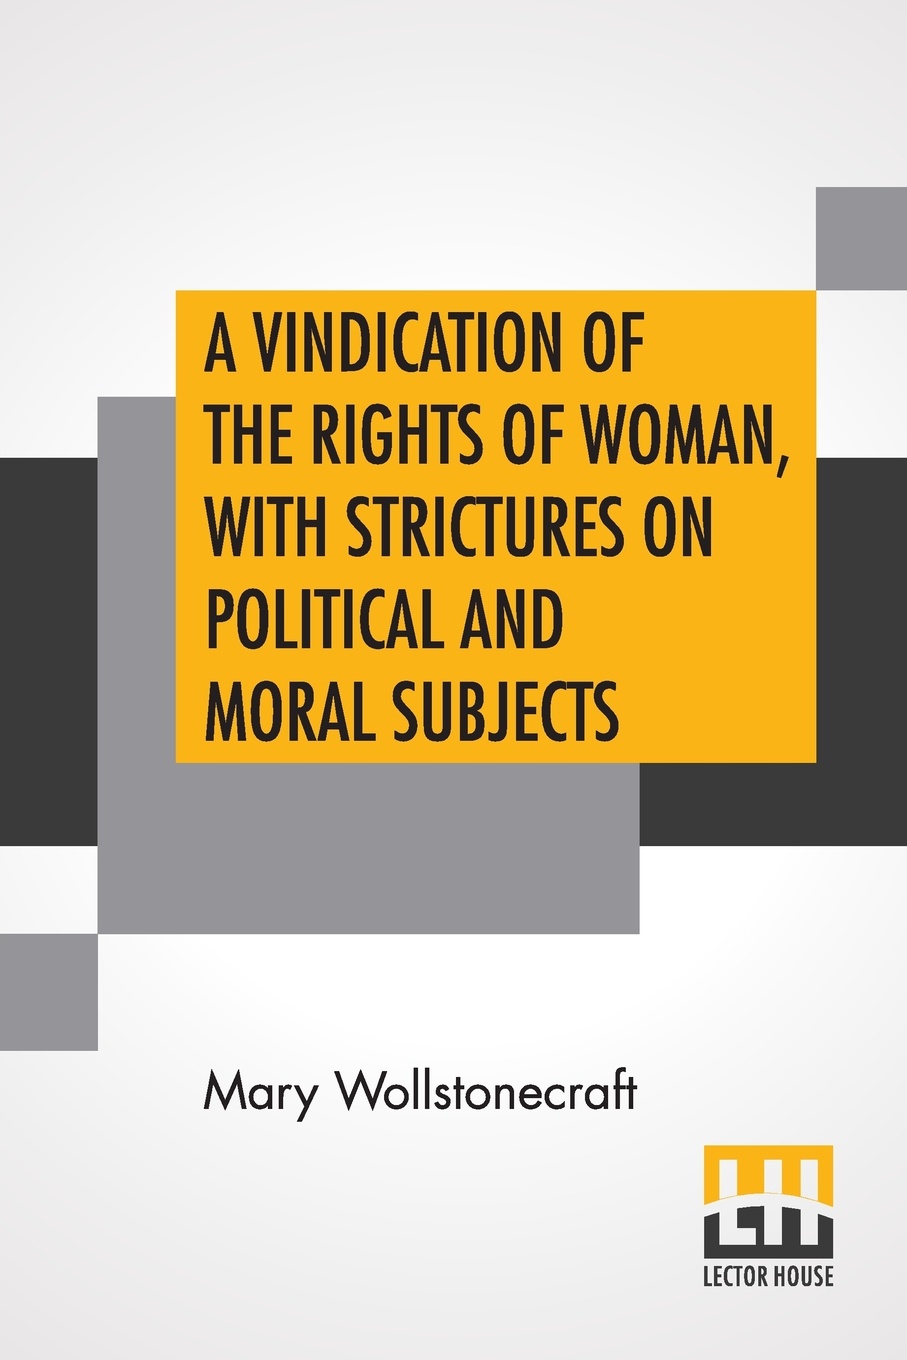 A Vindication Of The Rights Of Woman, With Strictures On Political And Moral Subjects. With A Biographical Sketch Of The Author.